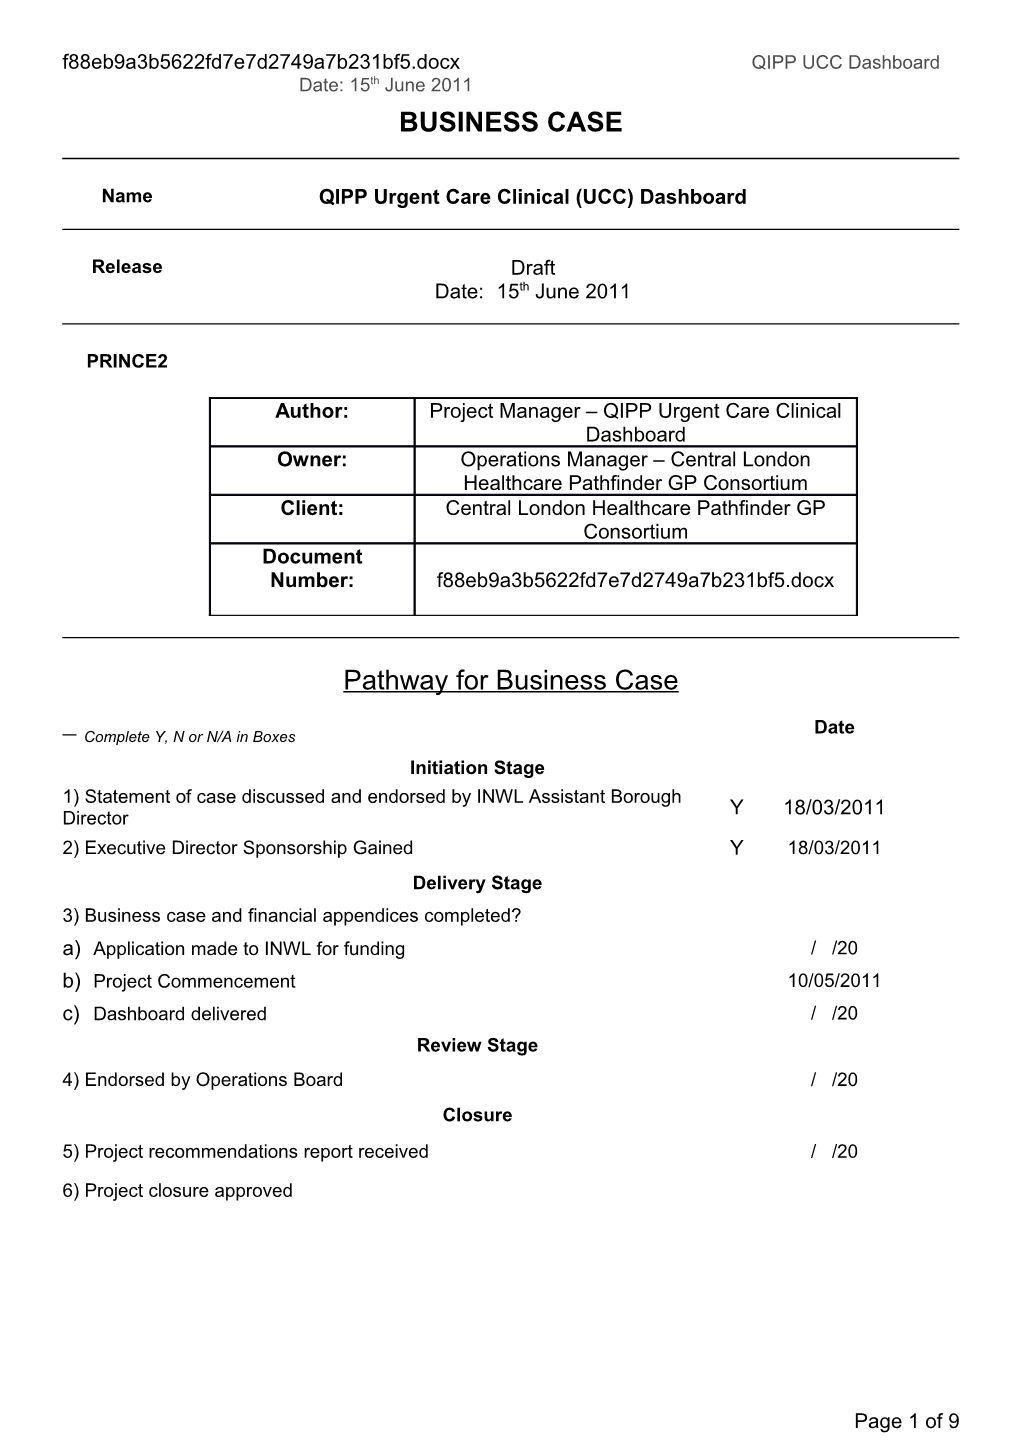 Pathway for Business Case